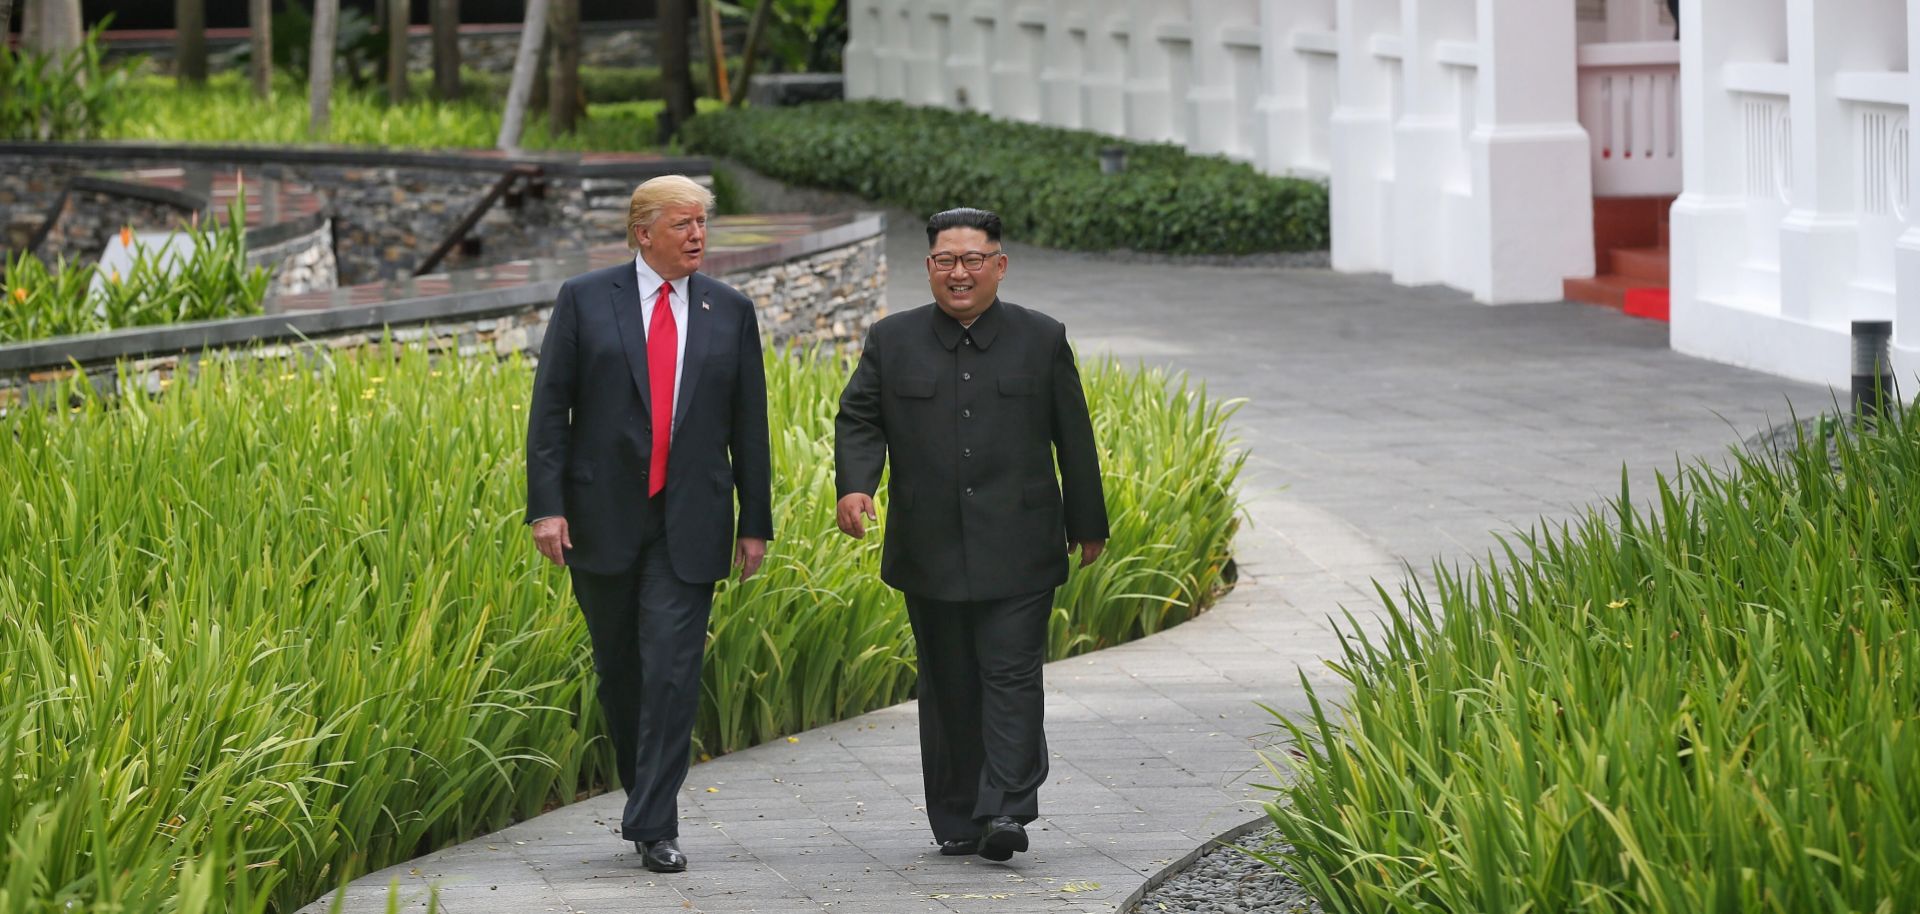 In this photograph, U.S. President Donald Trump (left) and North Korean leader Kim Jong Un are shown during their Singapore summit on June 12, 2018.